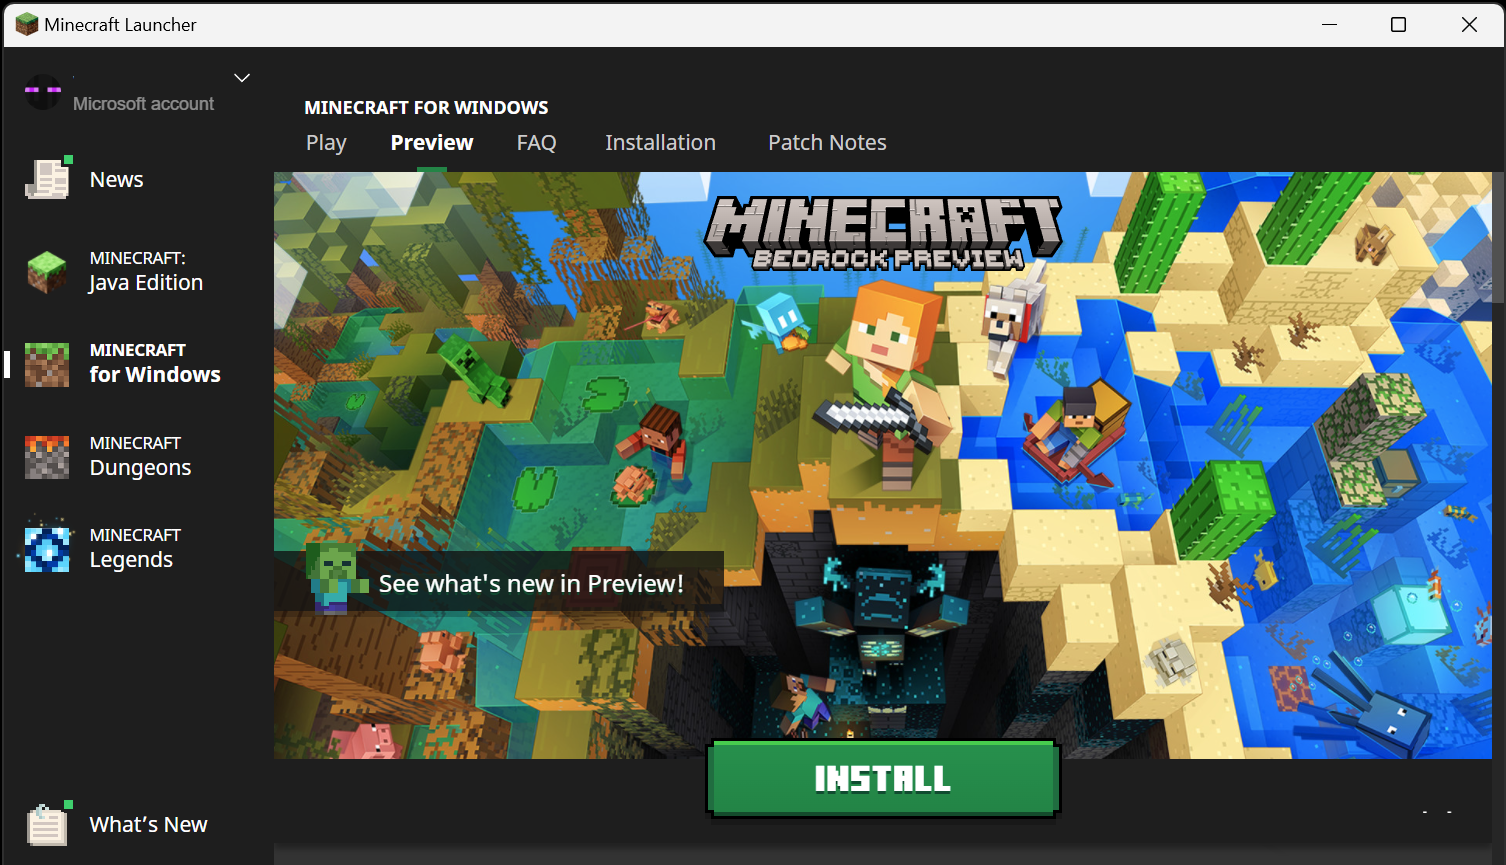 Image of Minecraft Launcher with Minecraft Preview tab displayed